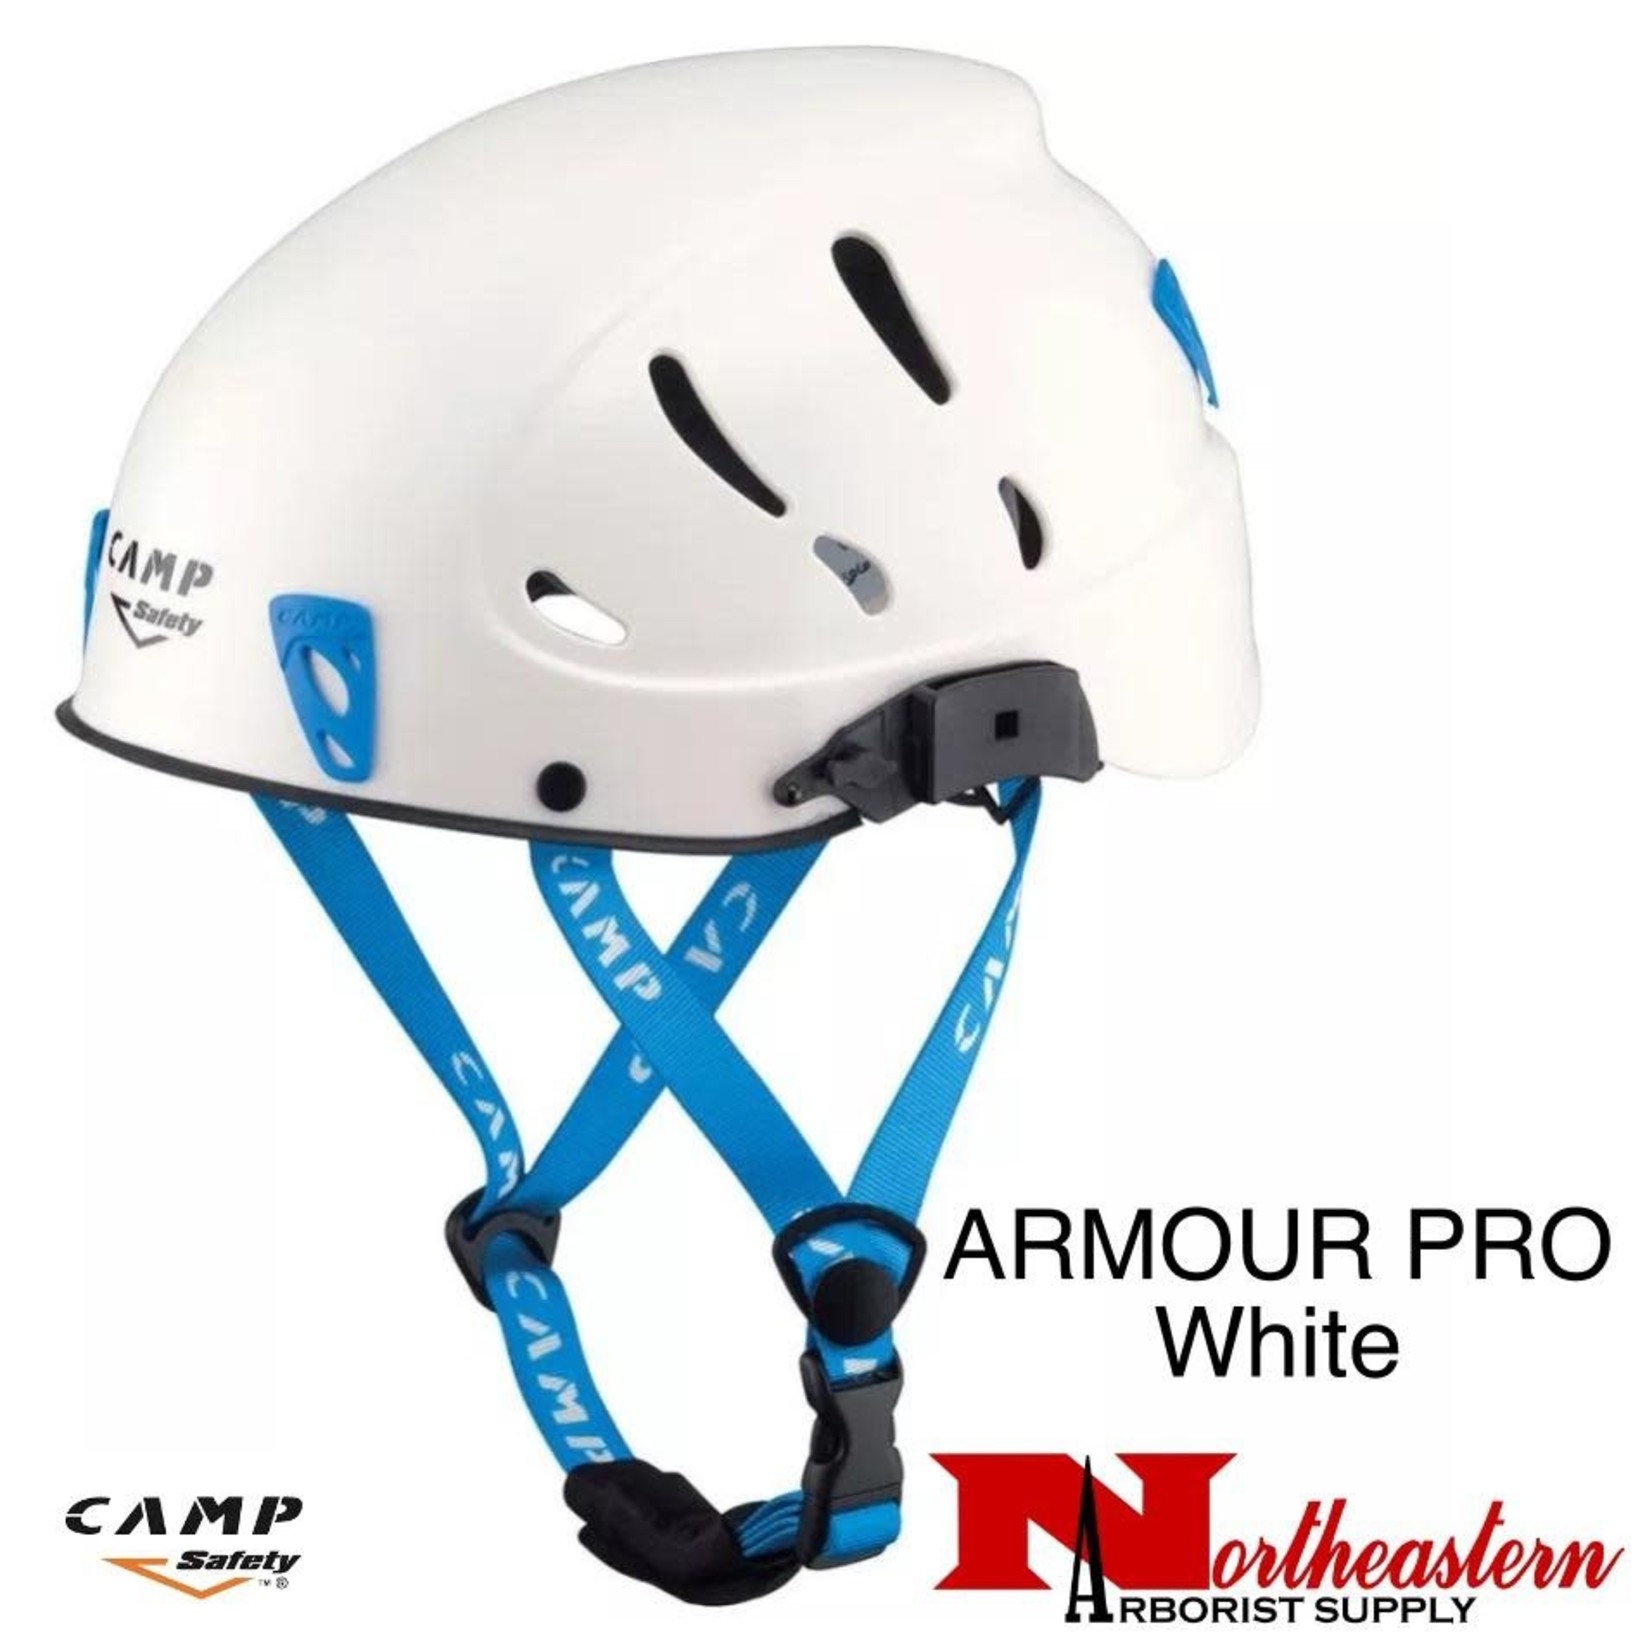 CAMP SAFETY ARMOUR PRO Helmet